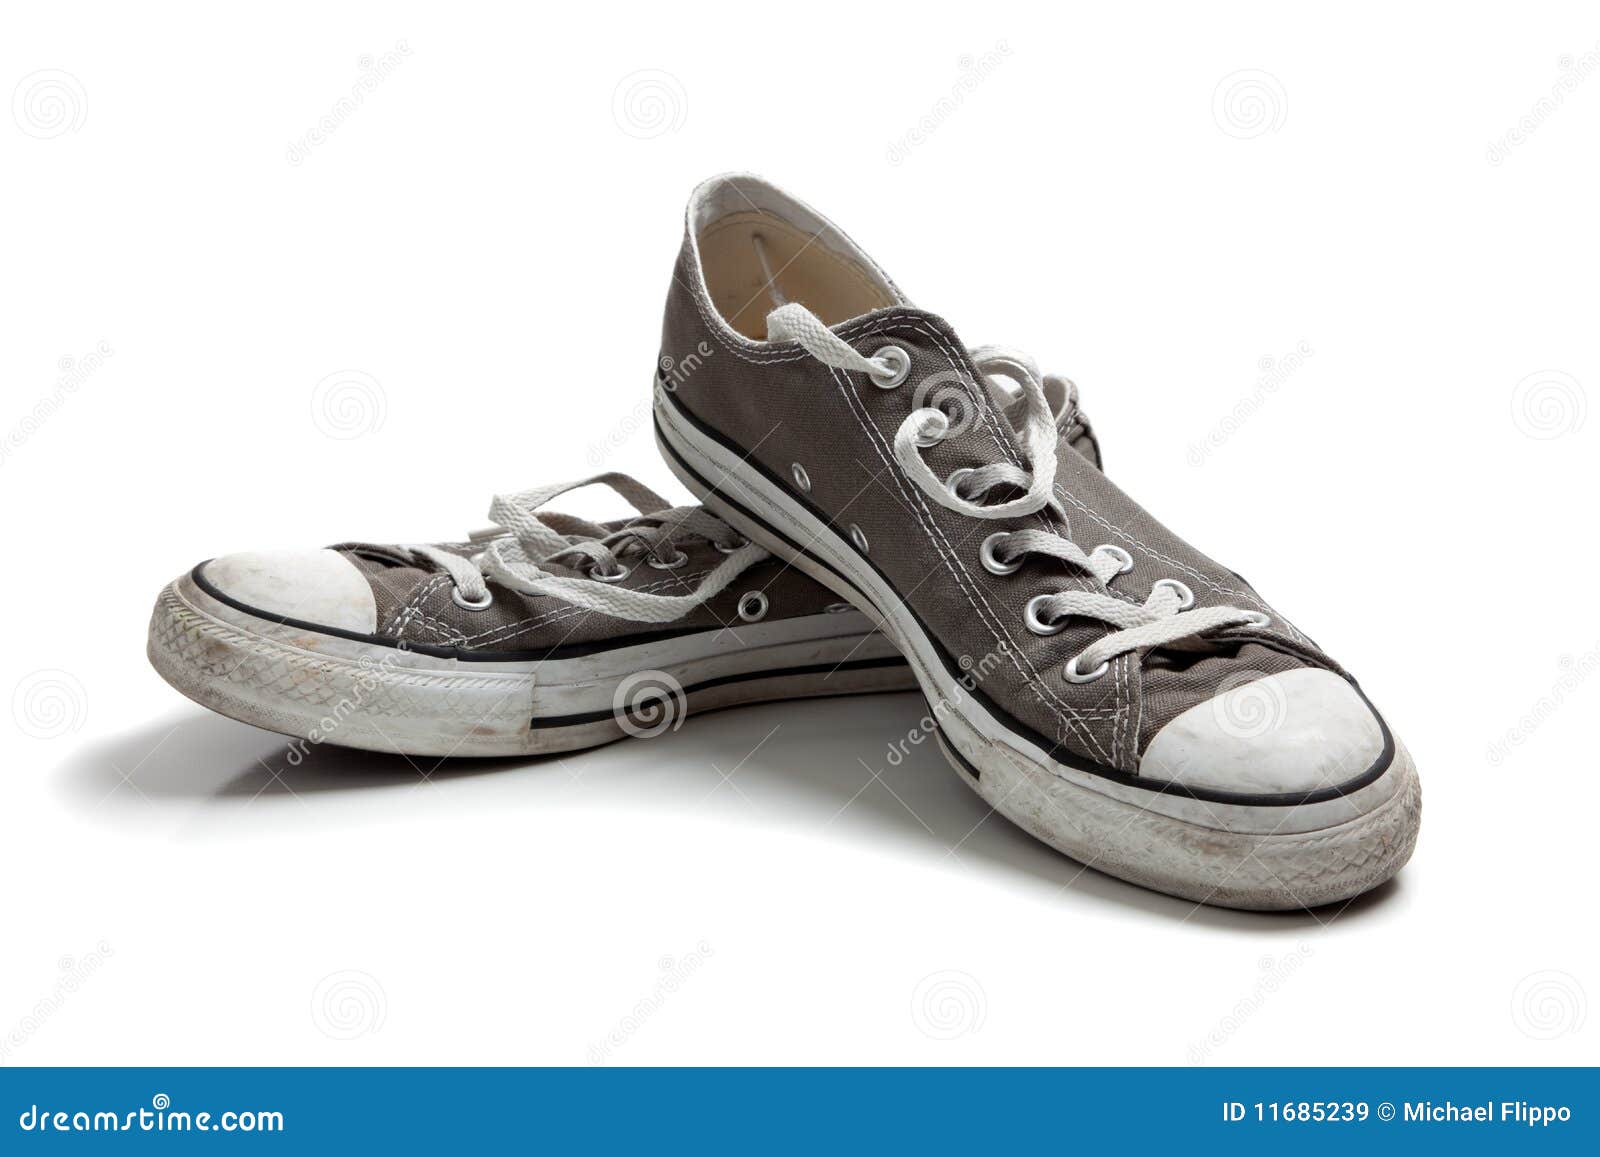 Gray sneakers on white stock image. Image of copy, isolated - 11685239